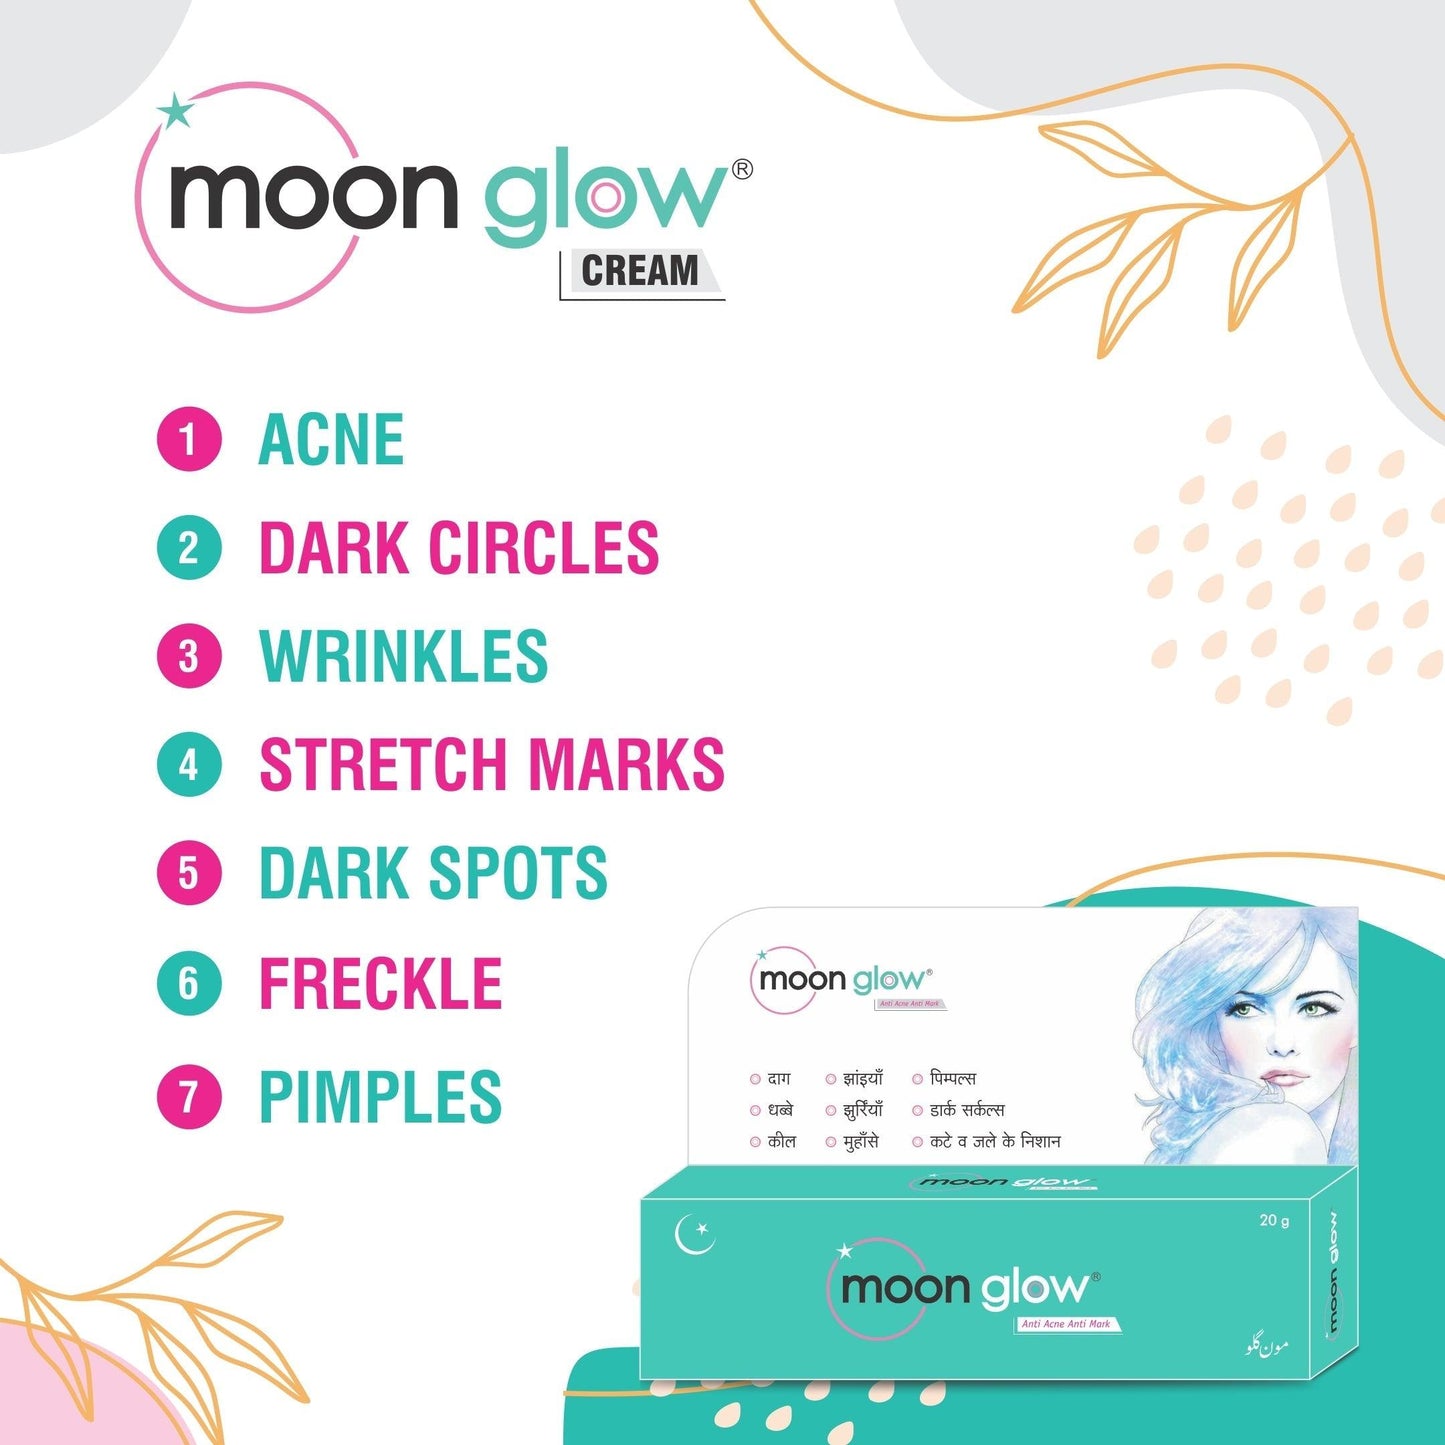 Moon Glow Cream & Soap for Acne, Pimples, Black Spots, Dark Circles, Stretch Marks, Anti-Aging and Fairness (2 Cream + 4 soap) - Olefia Biopharma Limited